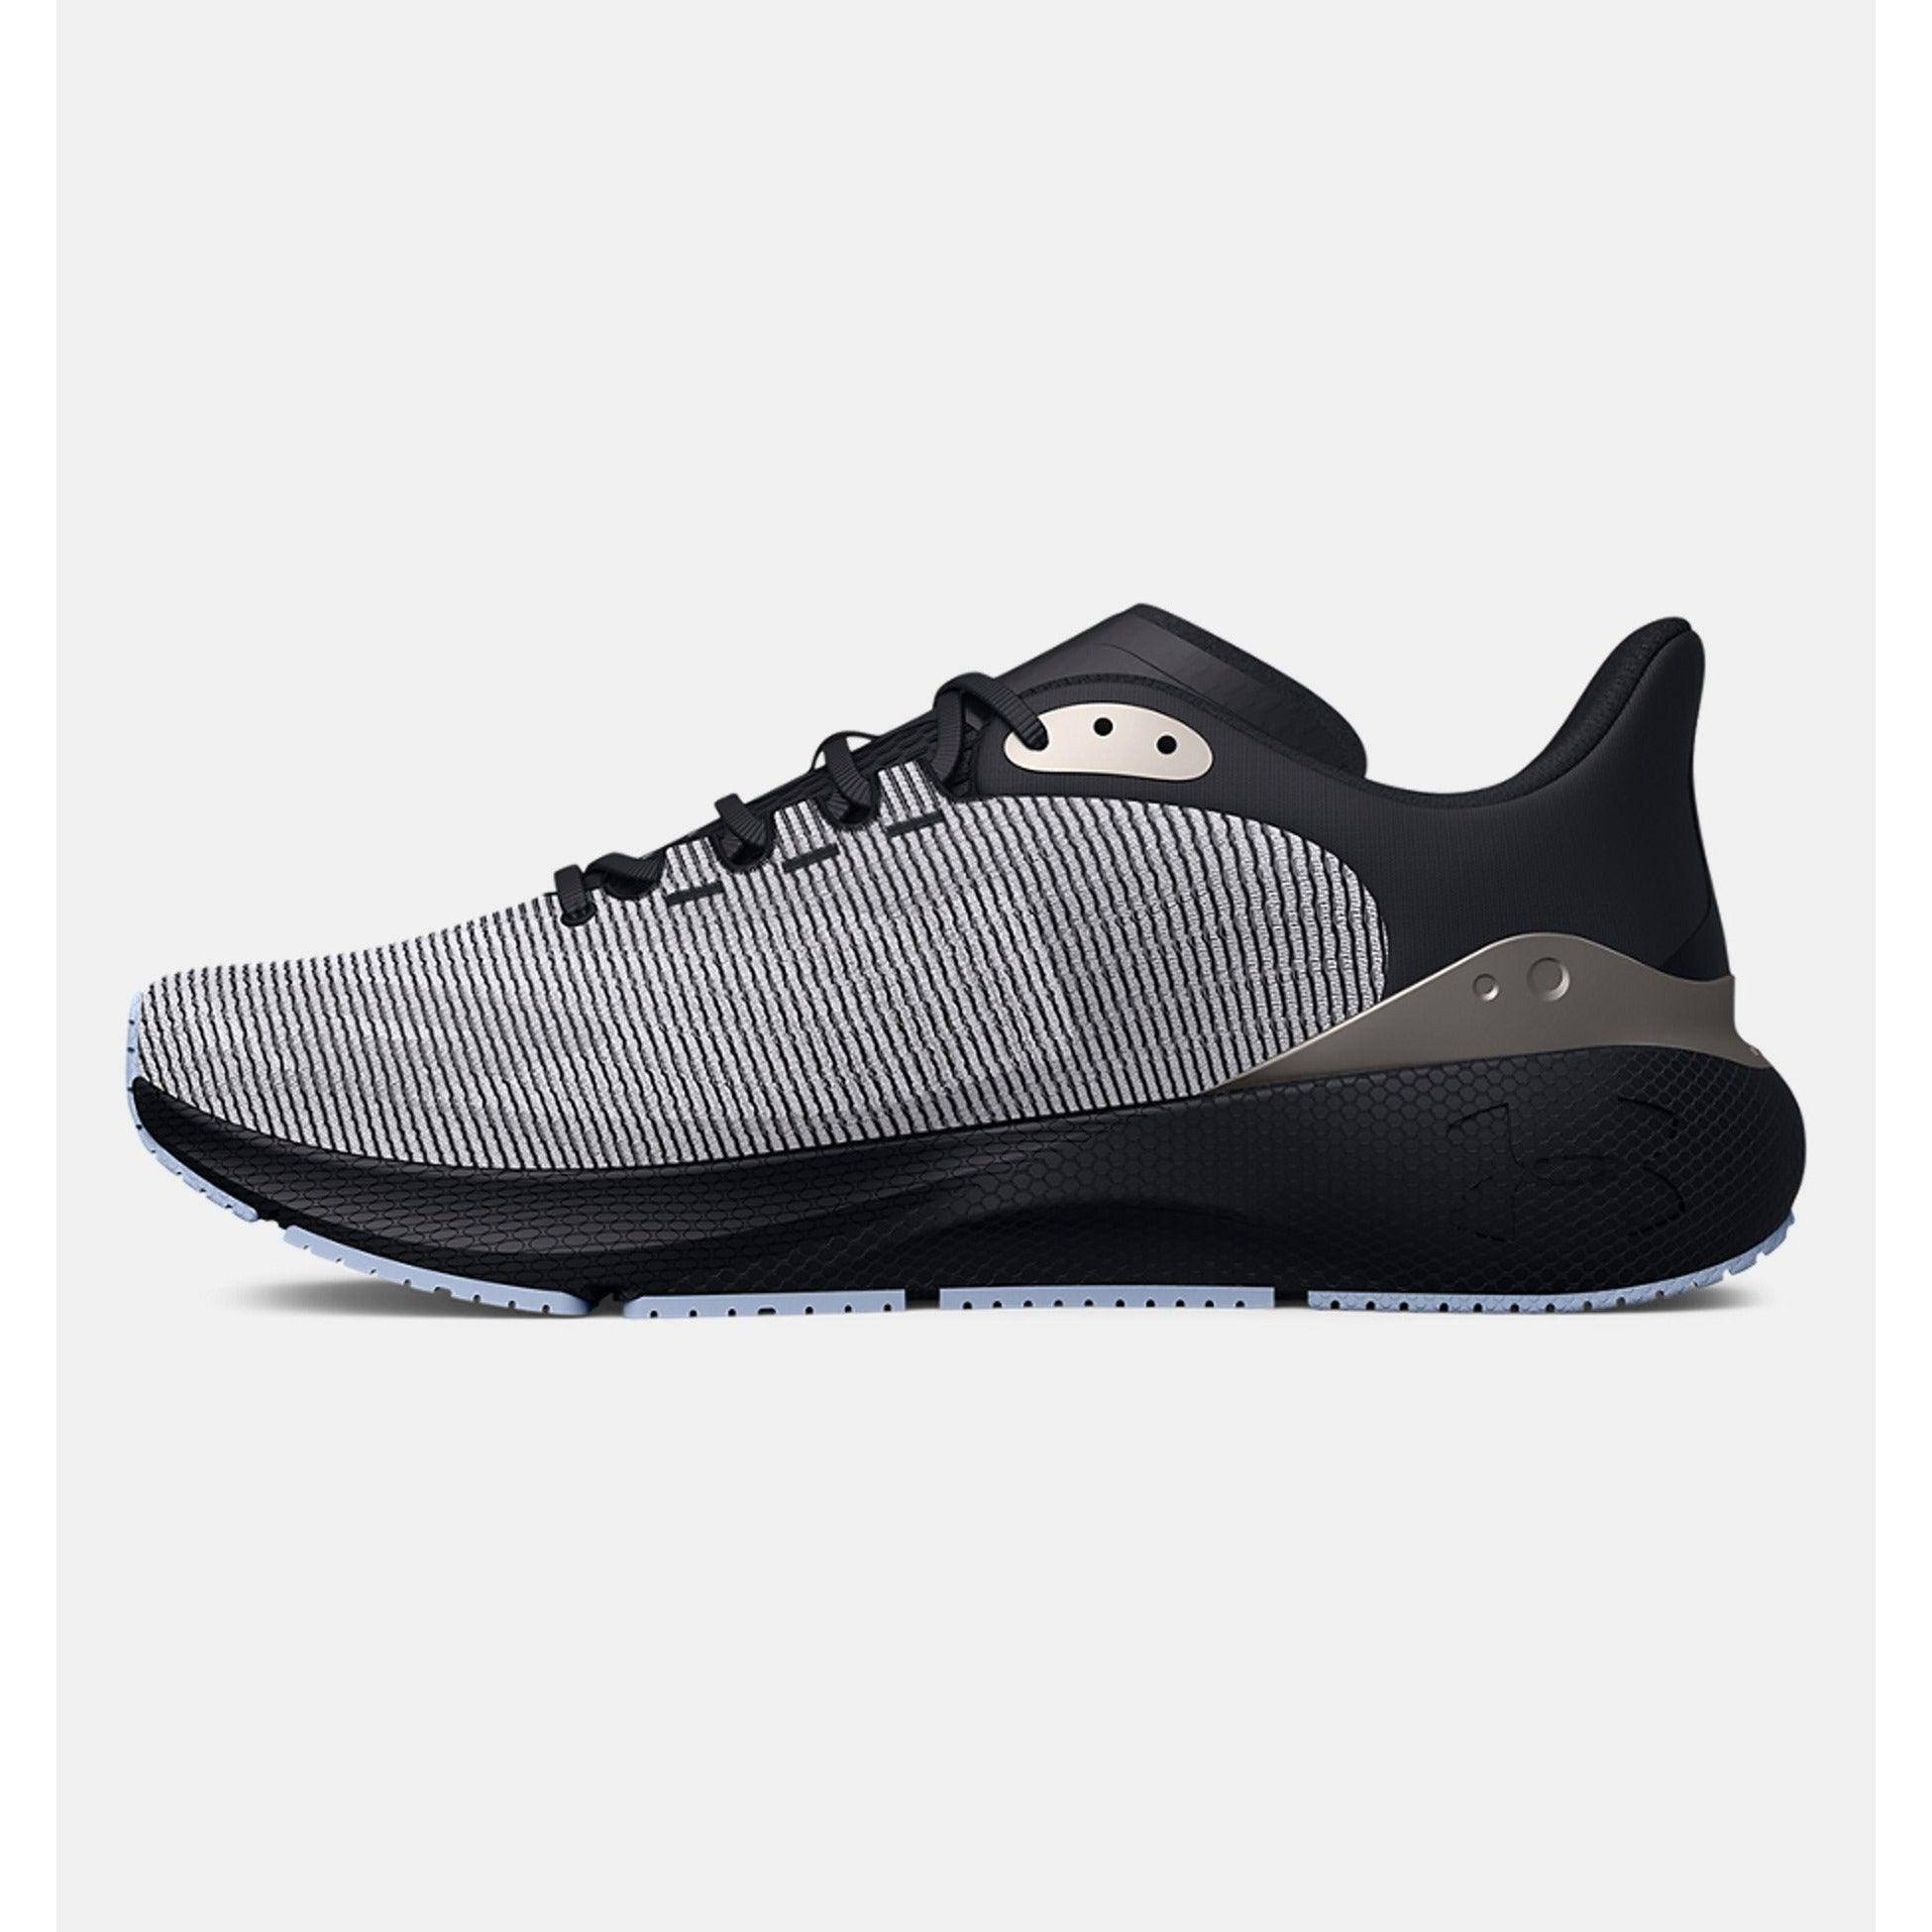 HOVR Machina 3 Breeze Bluetooth Running Shoe - The Shoe CollectiveUnder Armour